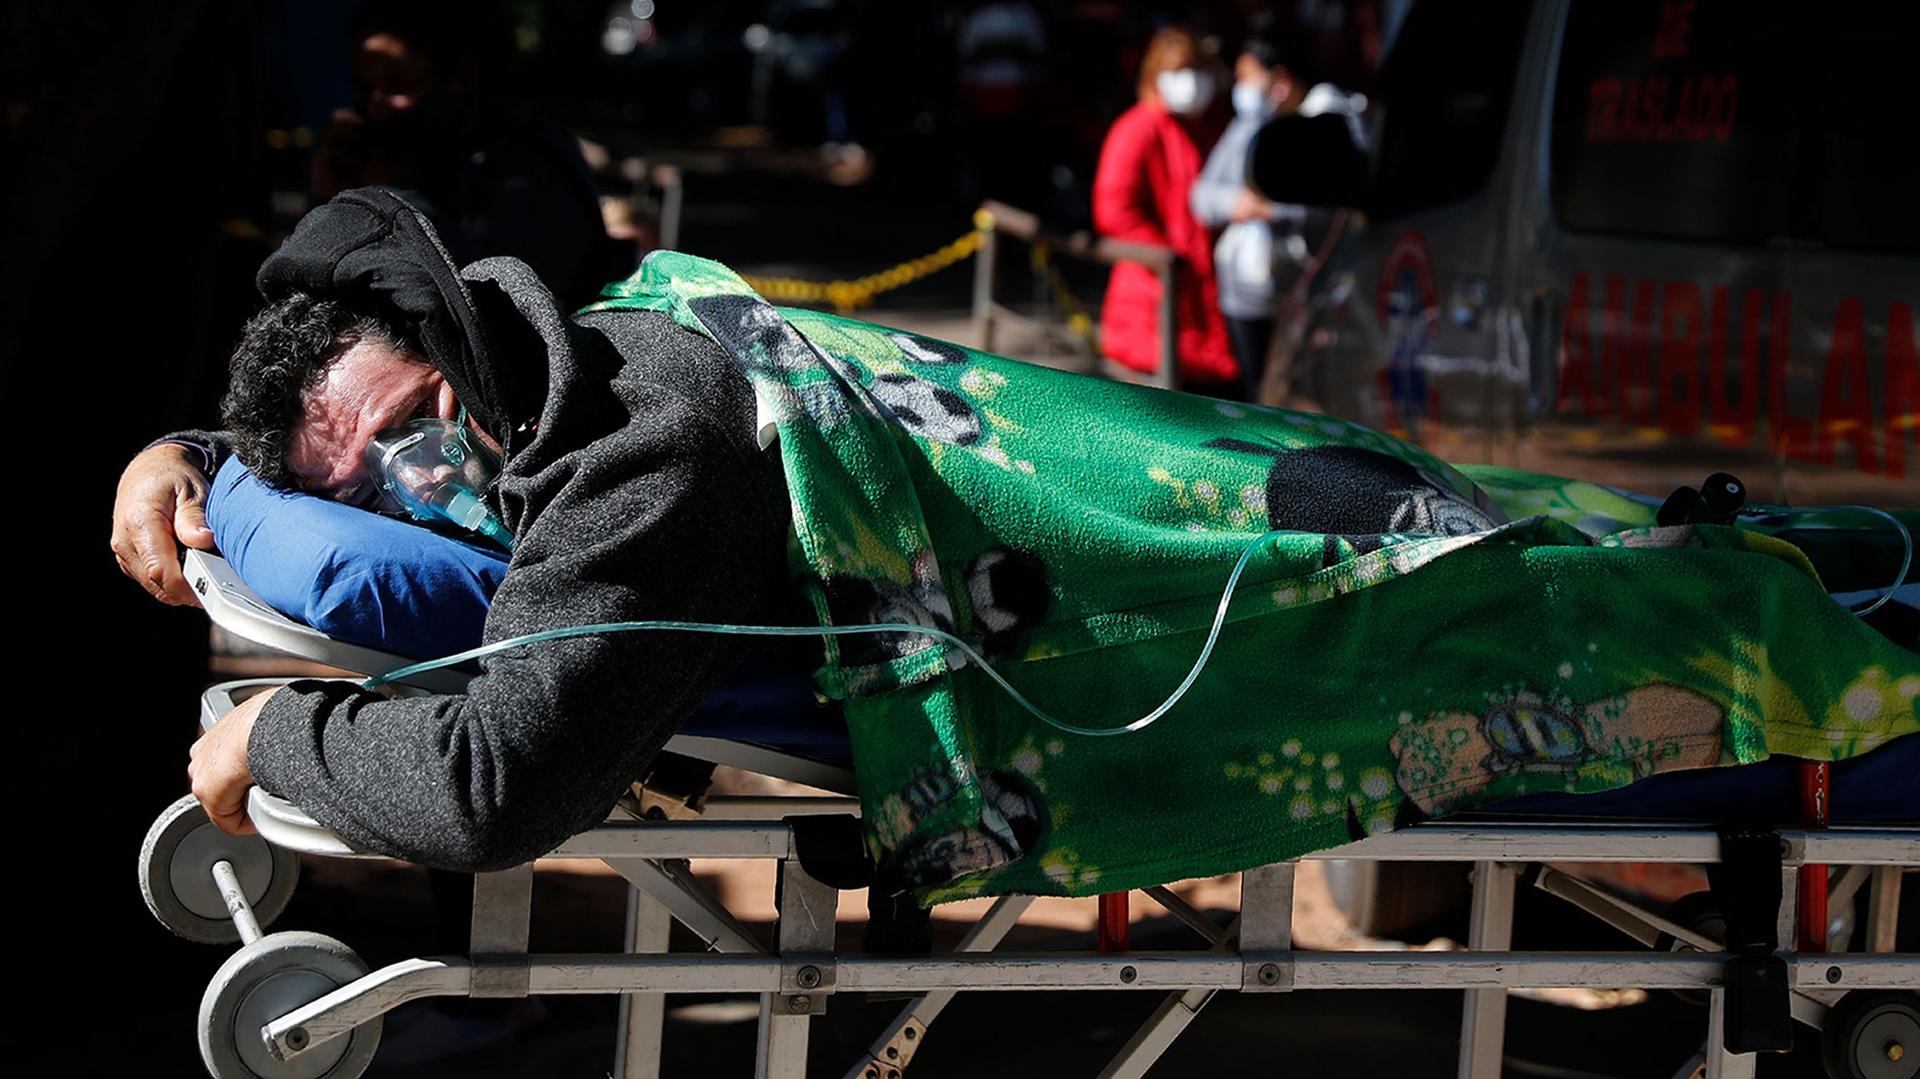 Man with oxygen mask lies face down on a stretcher with a green blanket on top and two people in the distance